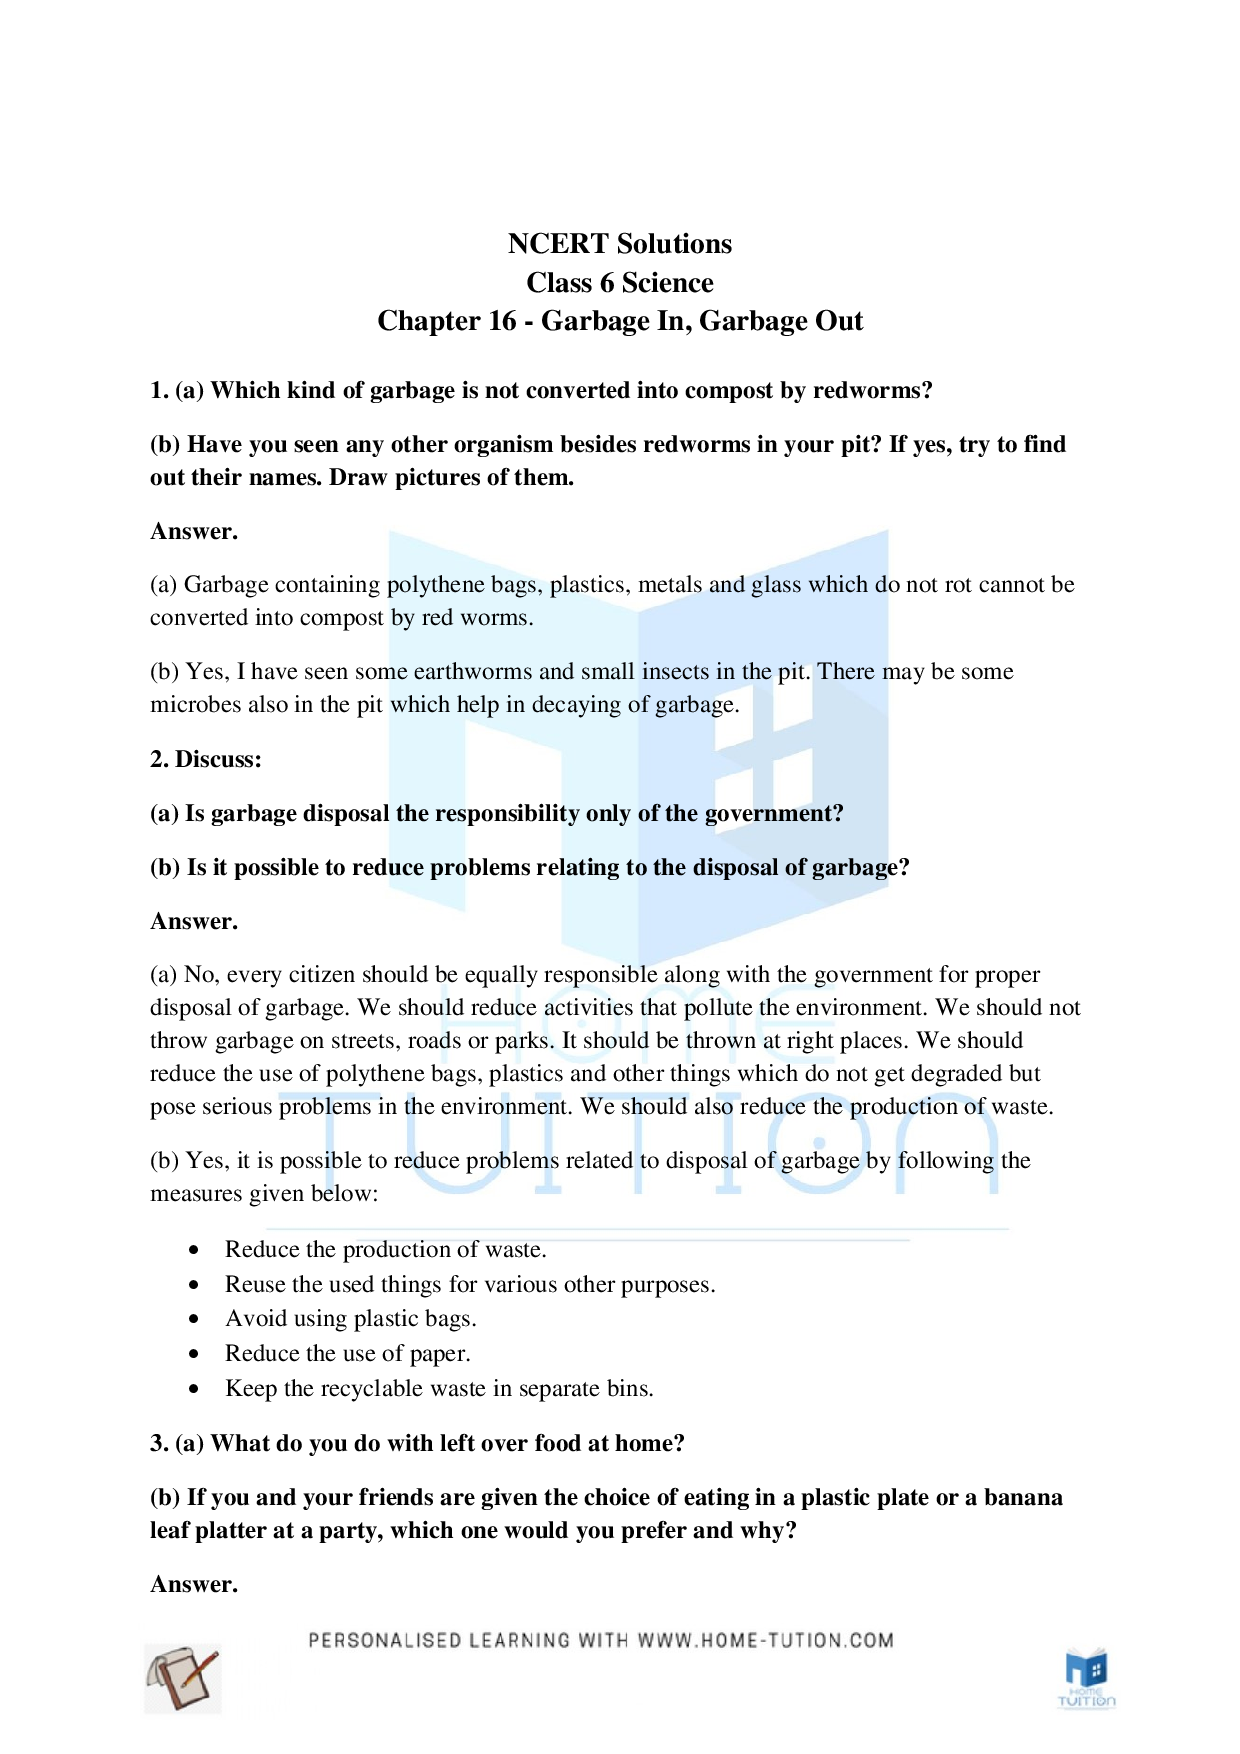 Class 6 Science Chapter 16 Garbage In, Garbage Out